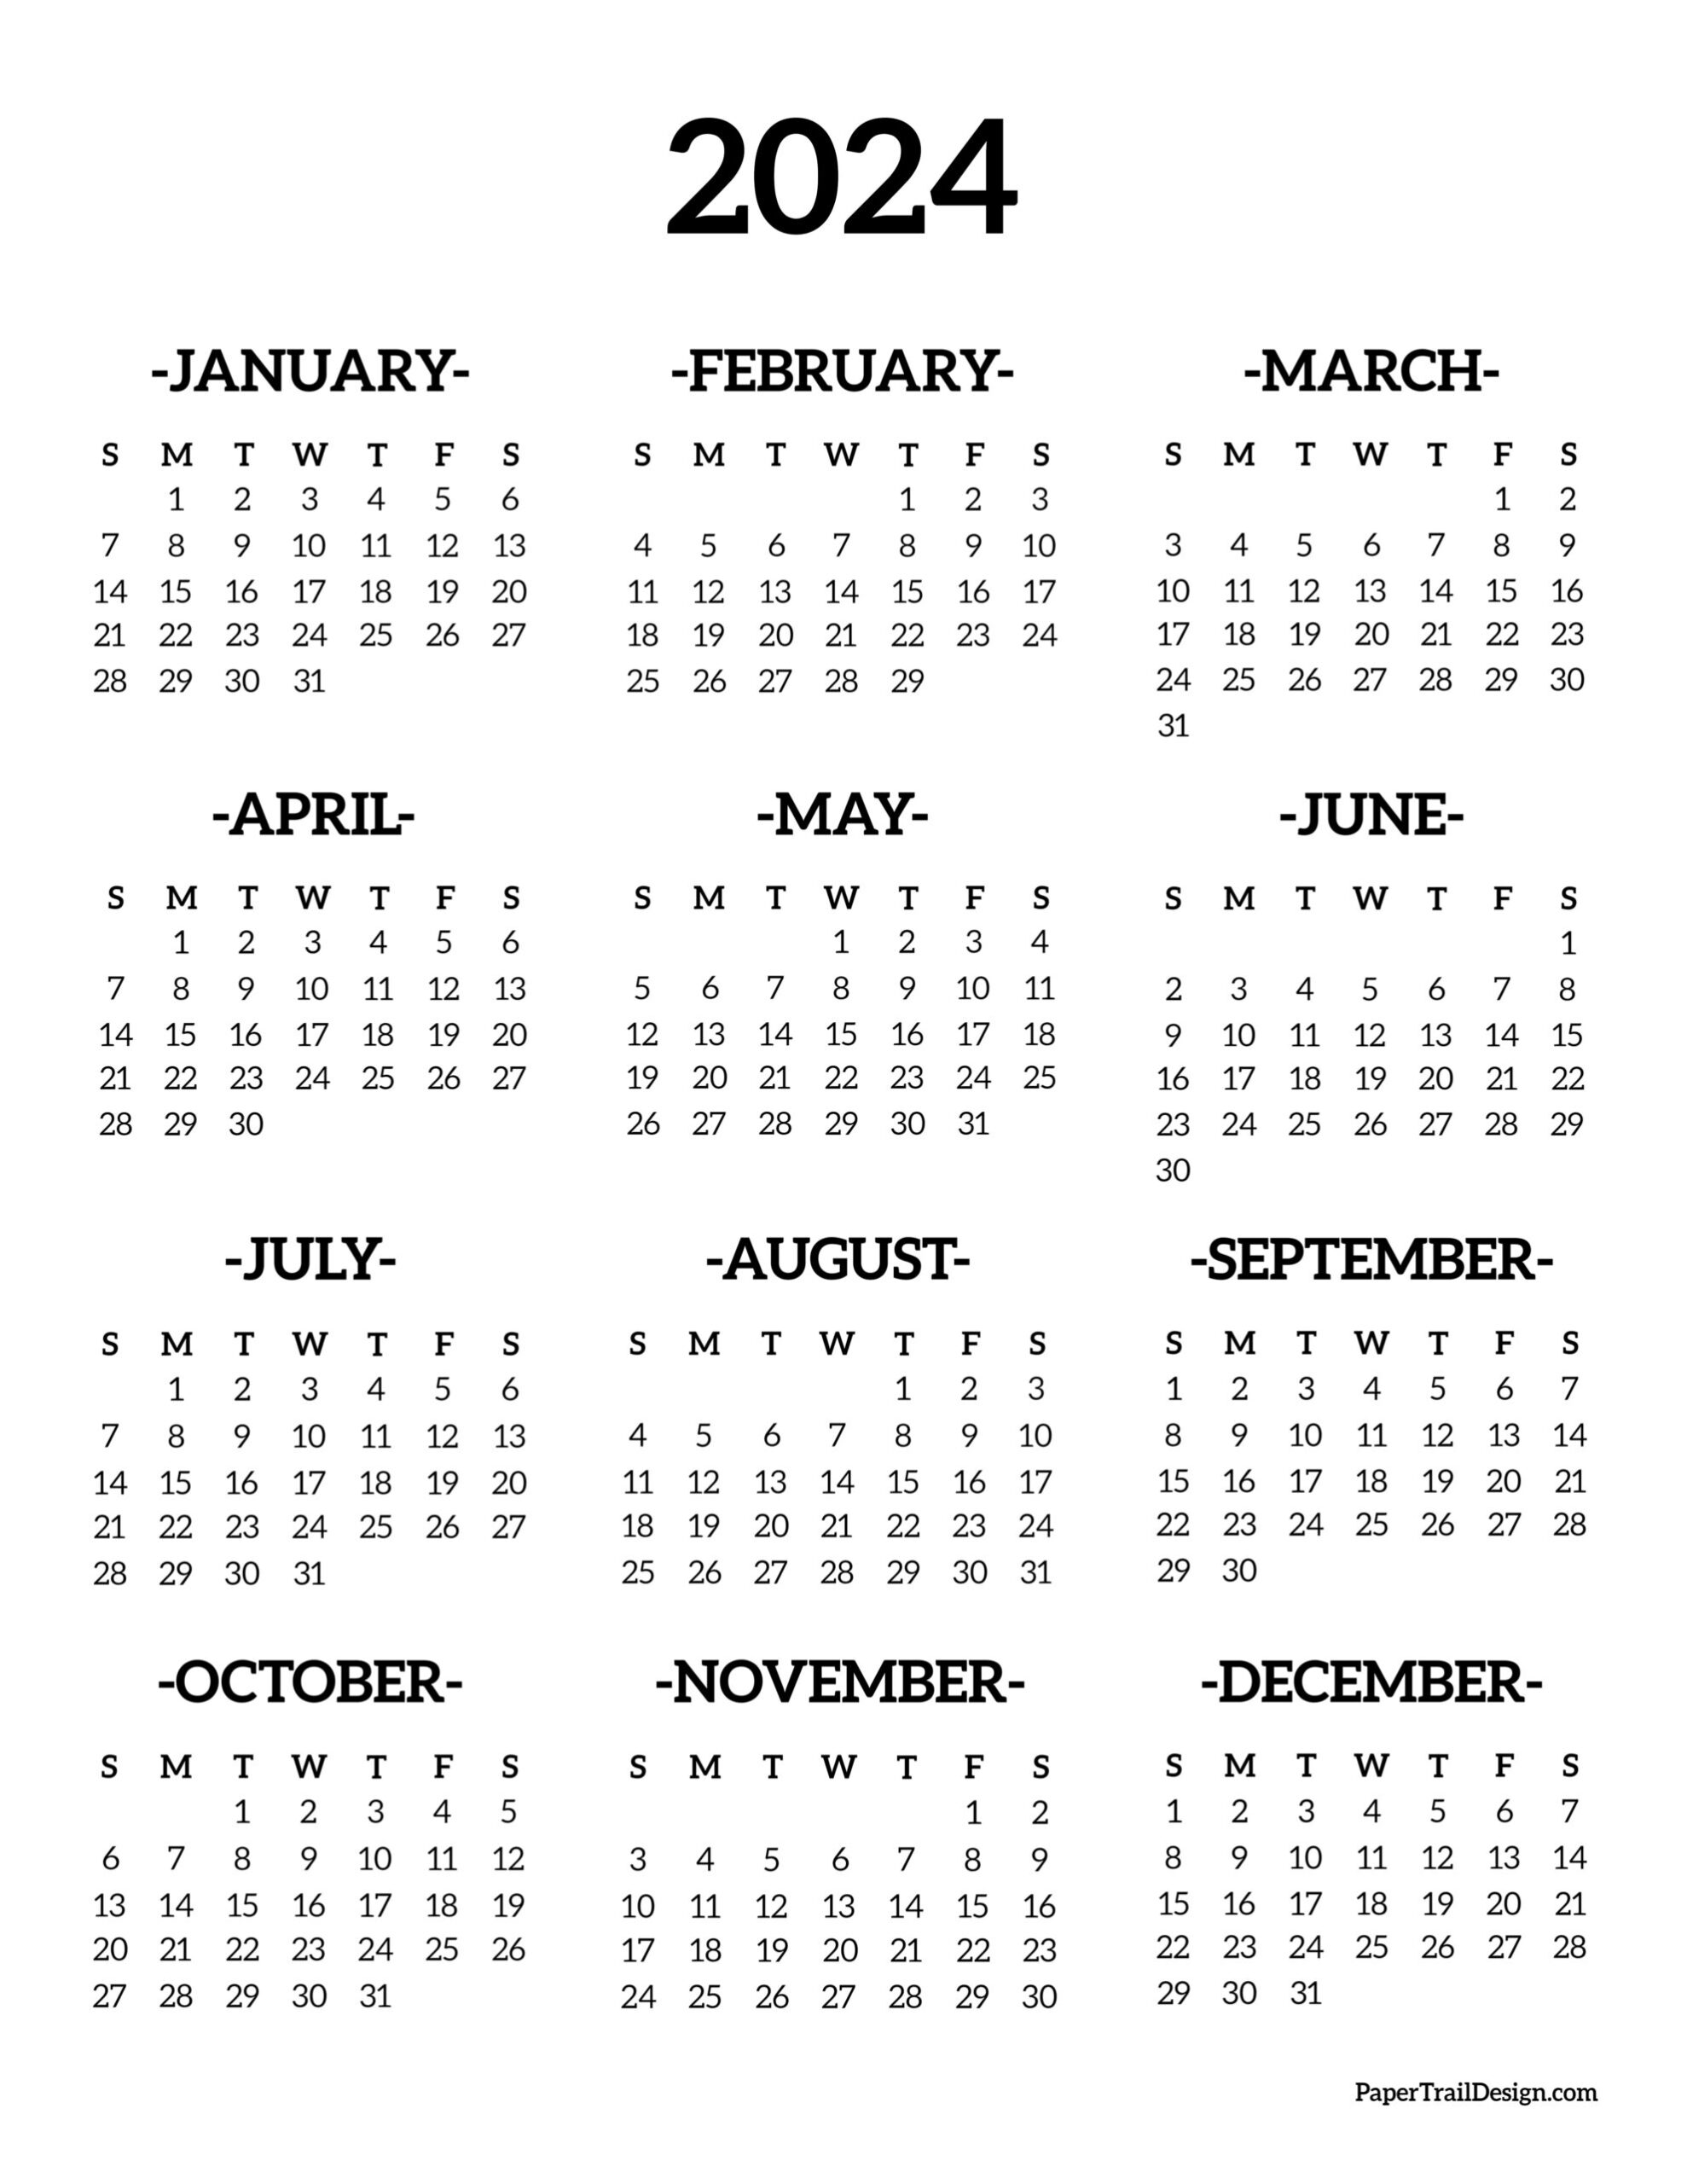 Calendar 2024 Printable One Page - Paper Trail Design for Free Printable Calendar 2024 Year